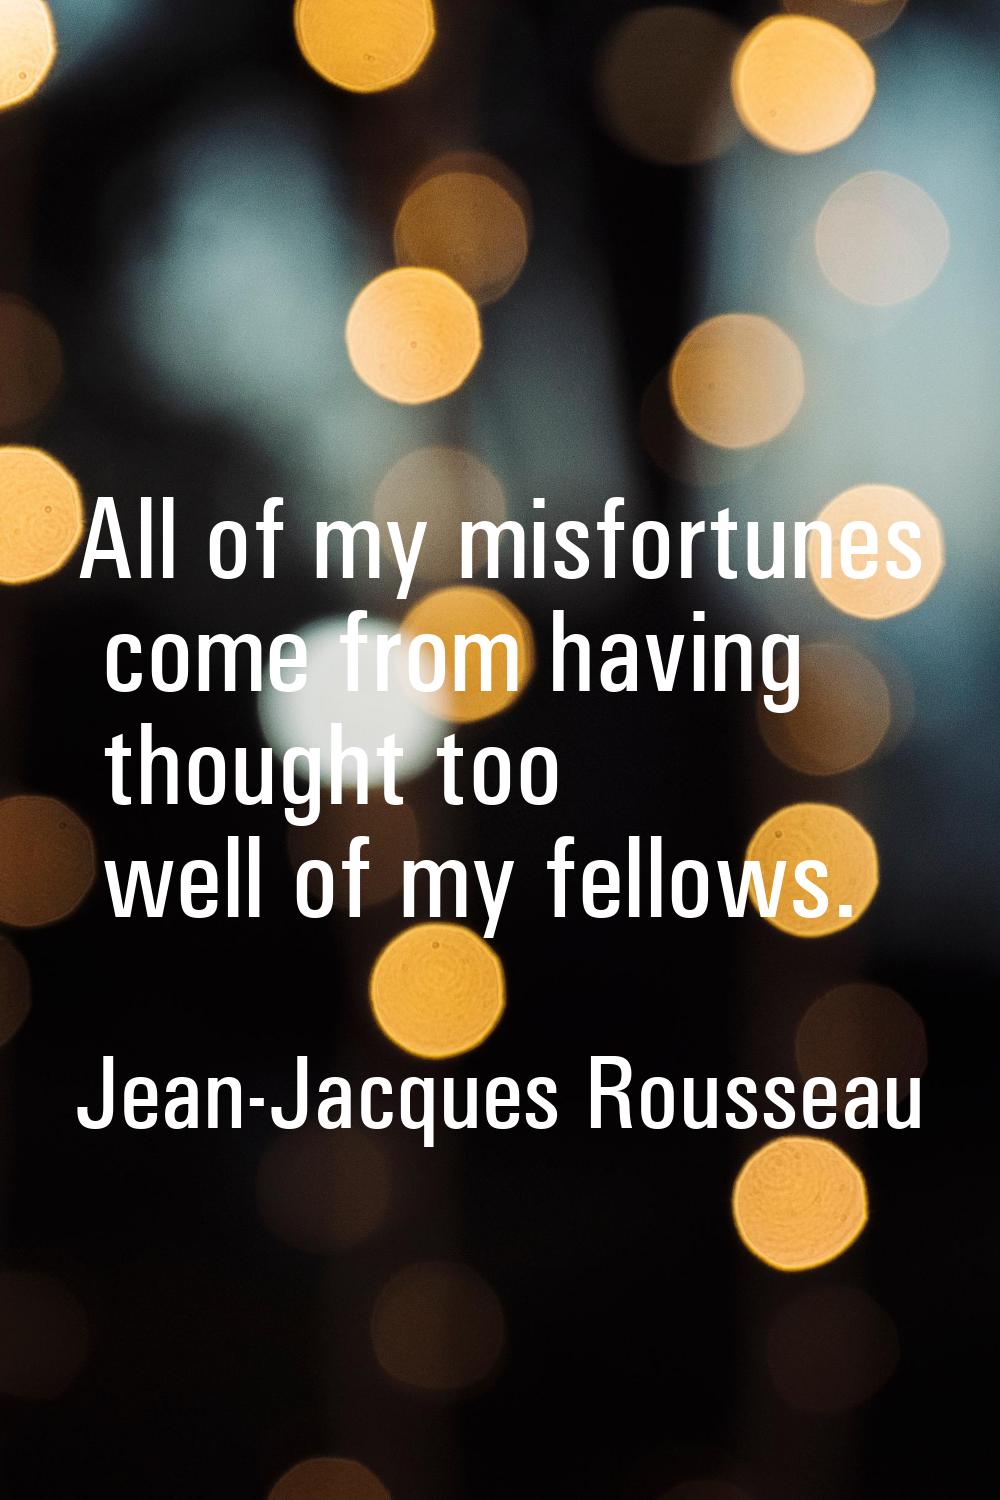 All of my misfortunes come from having thought too well of my fellows.